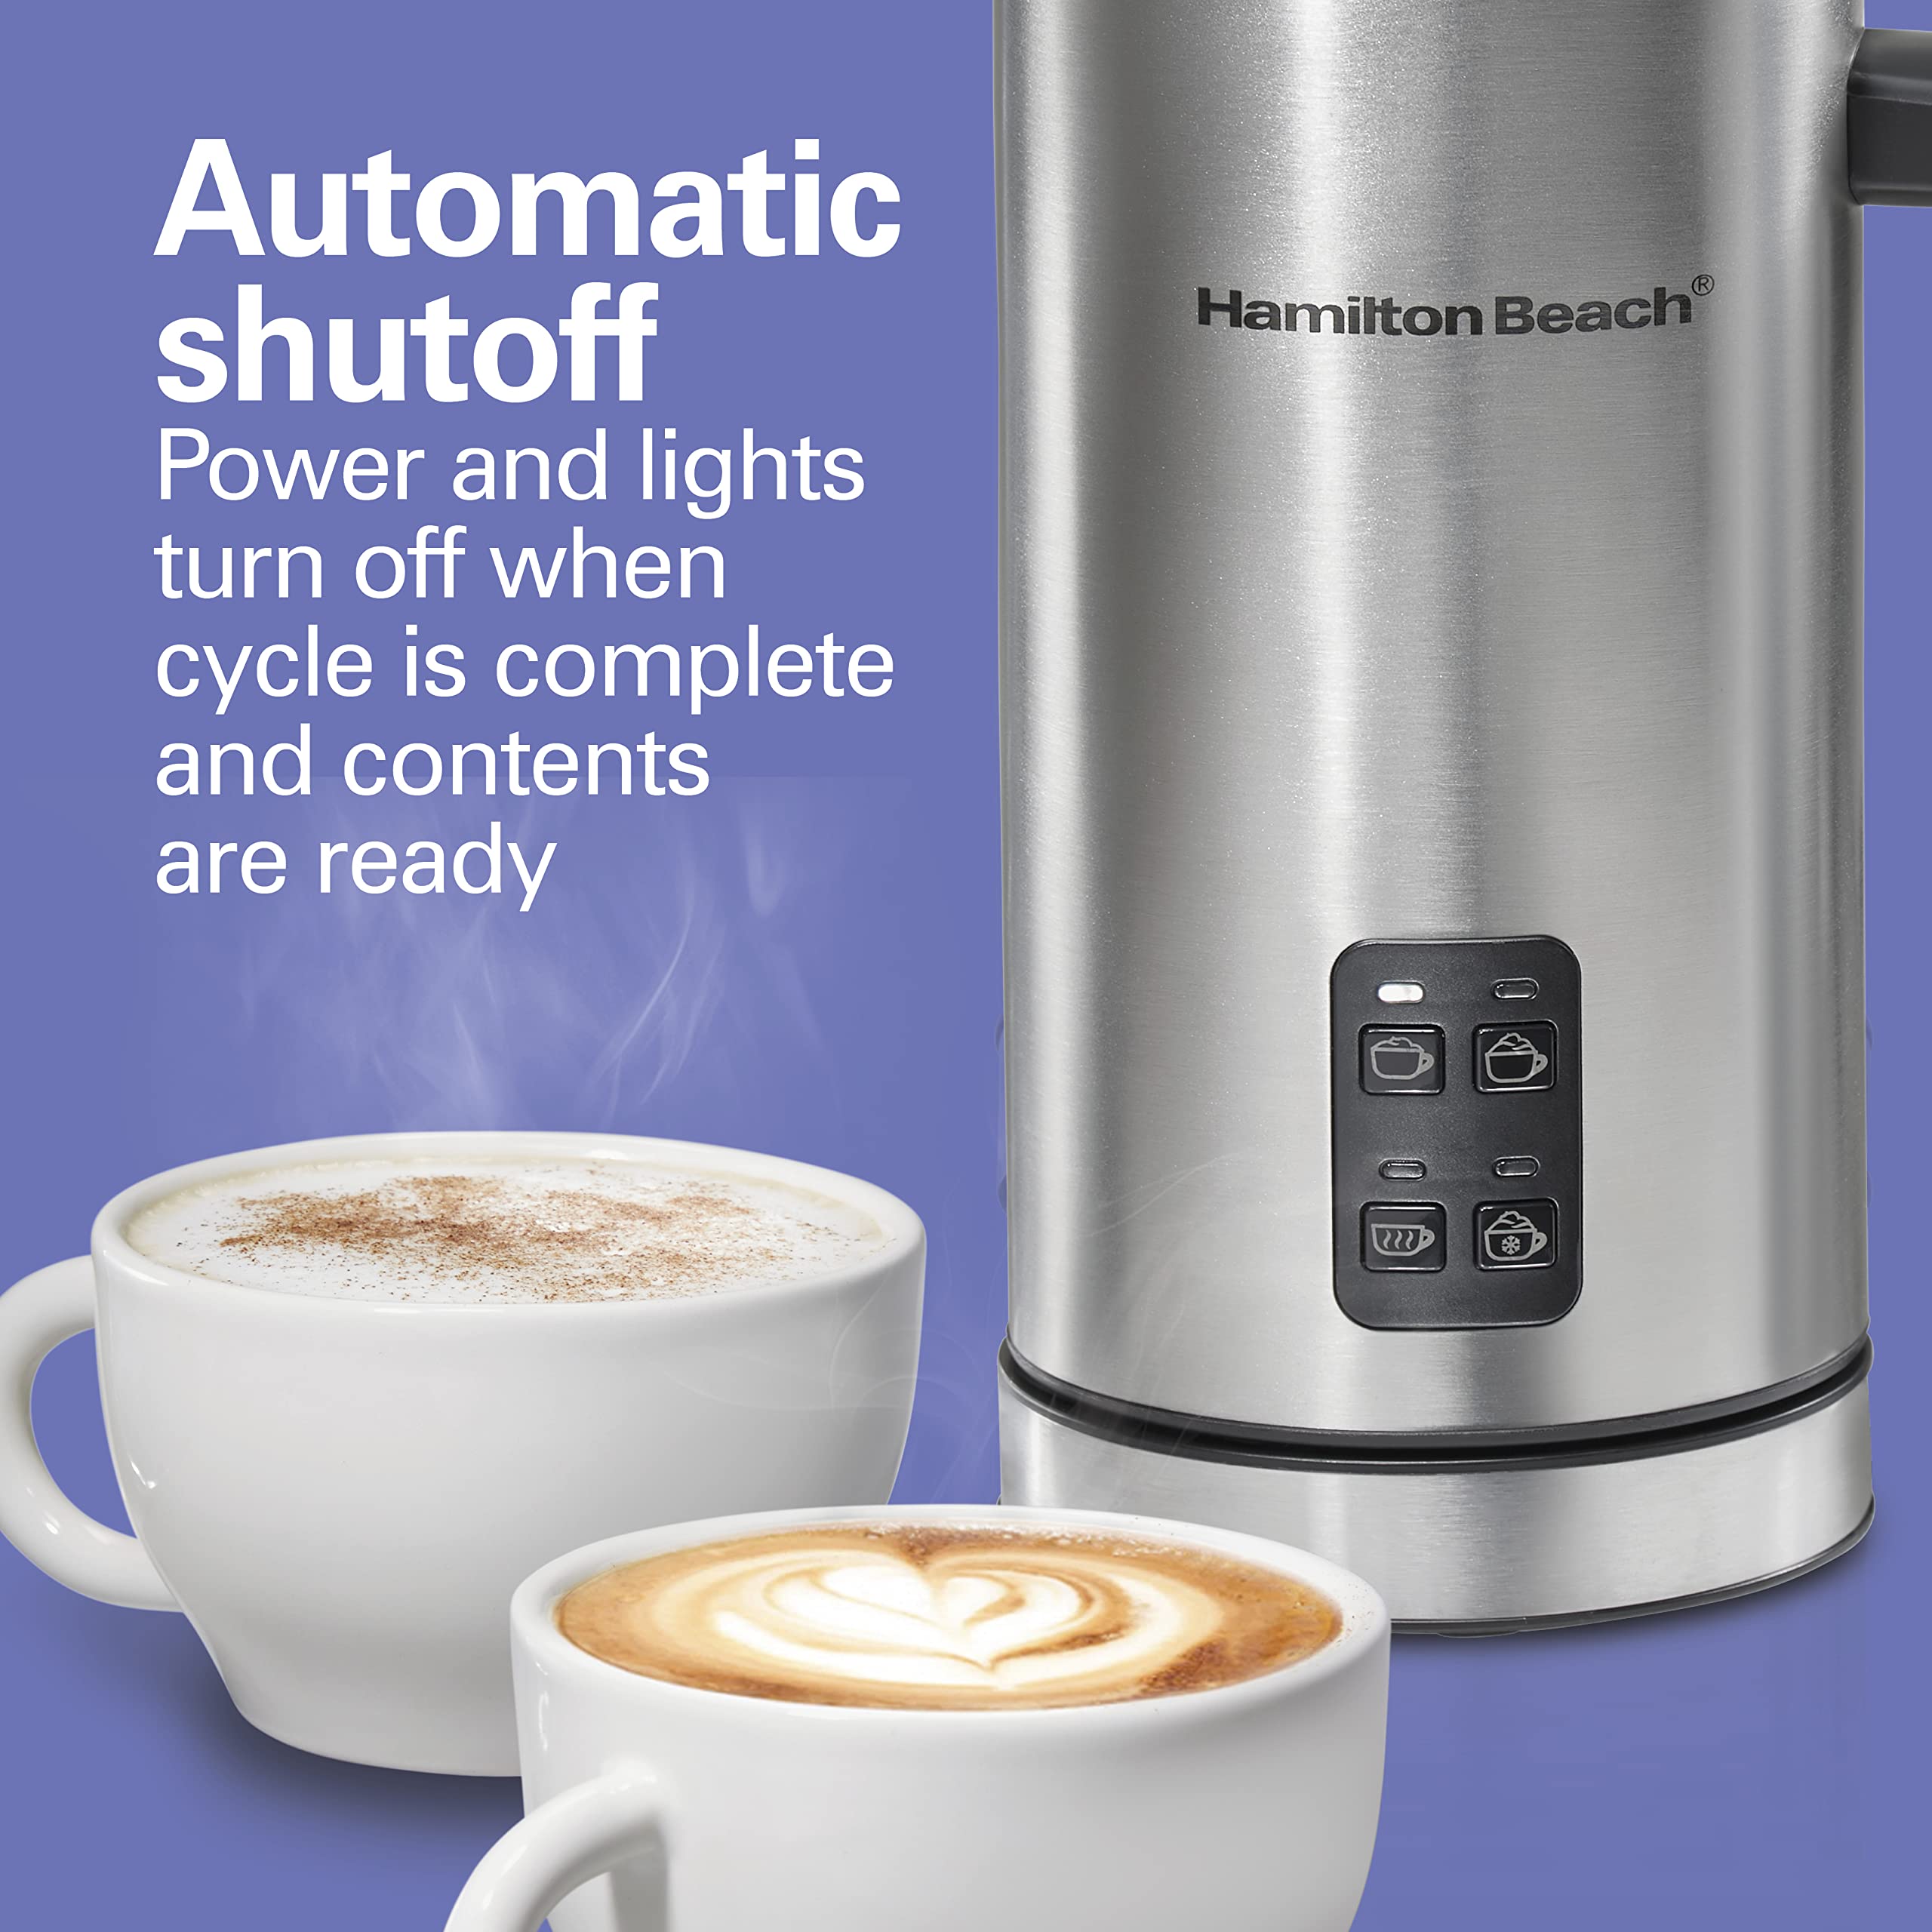 Hamilton Beach Electric Milk Frother & Warmer, Automatic Warm or Cold Foam, 5-10 oz., Create Café-Quality Coffee, Latte, Cappuccino, Frappe, Hot Chocolate, 4 Settings, Stainless Steel (43565C)